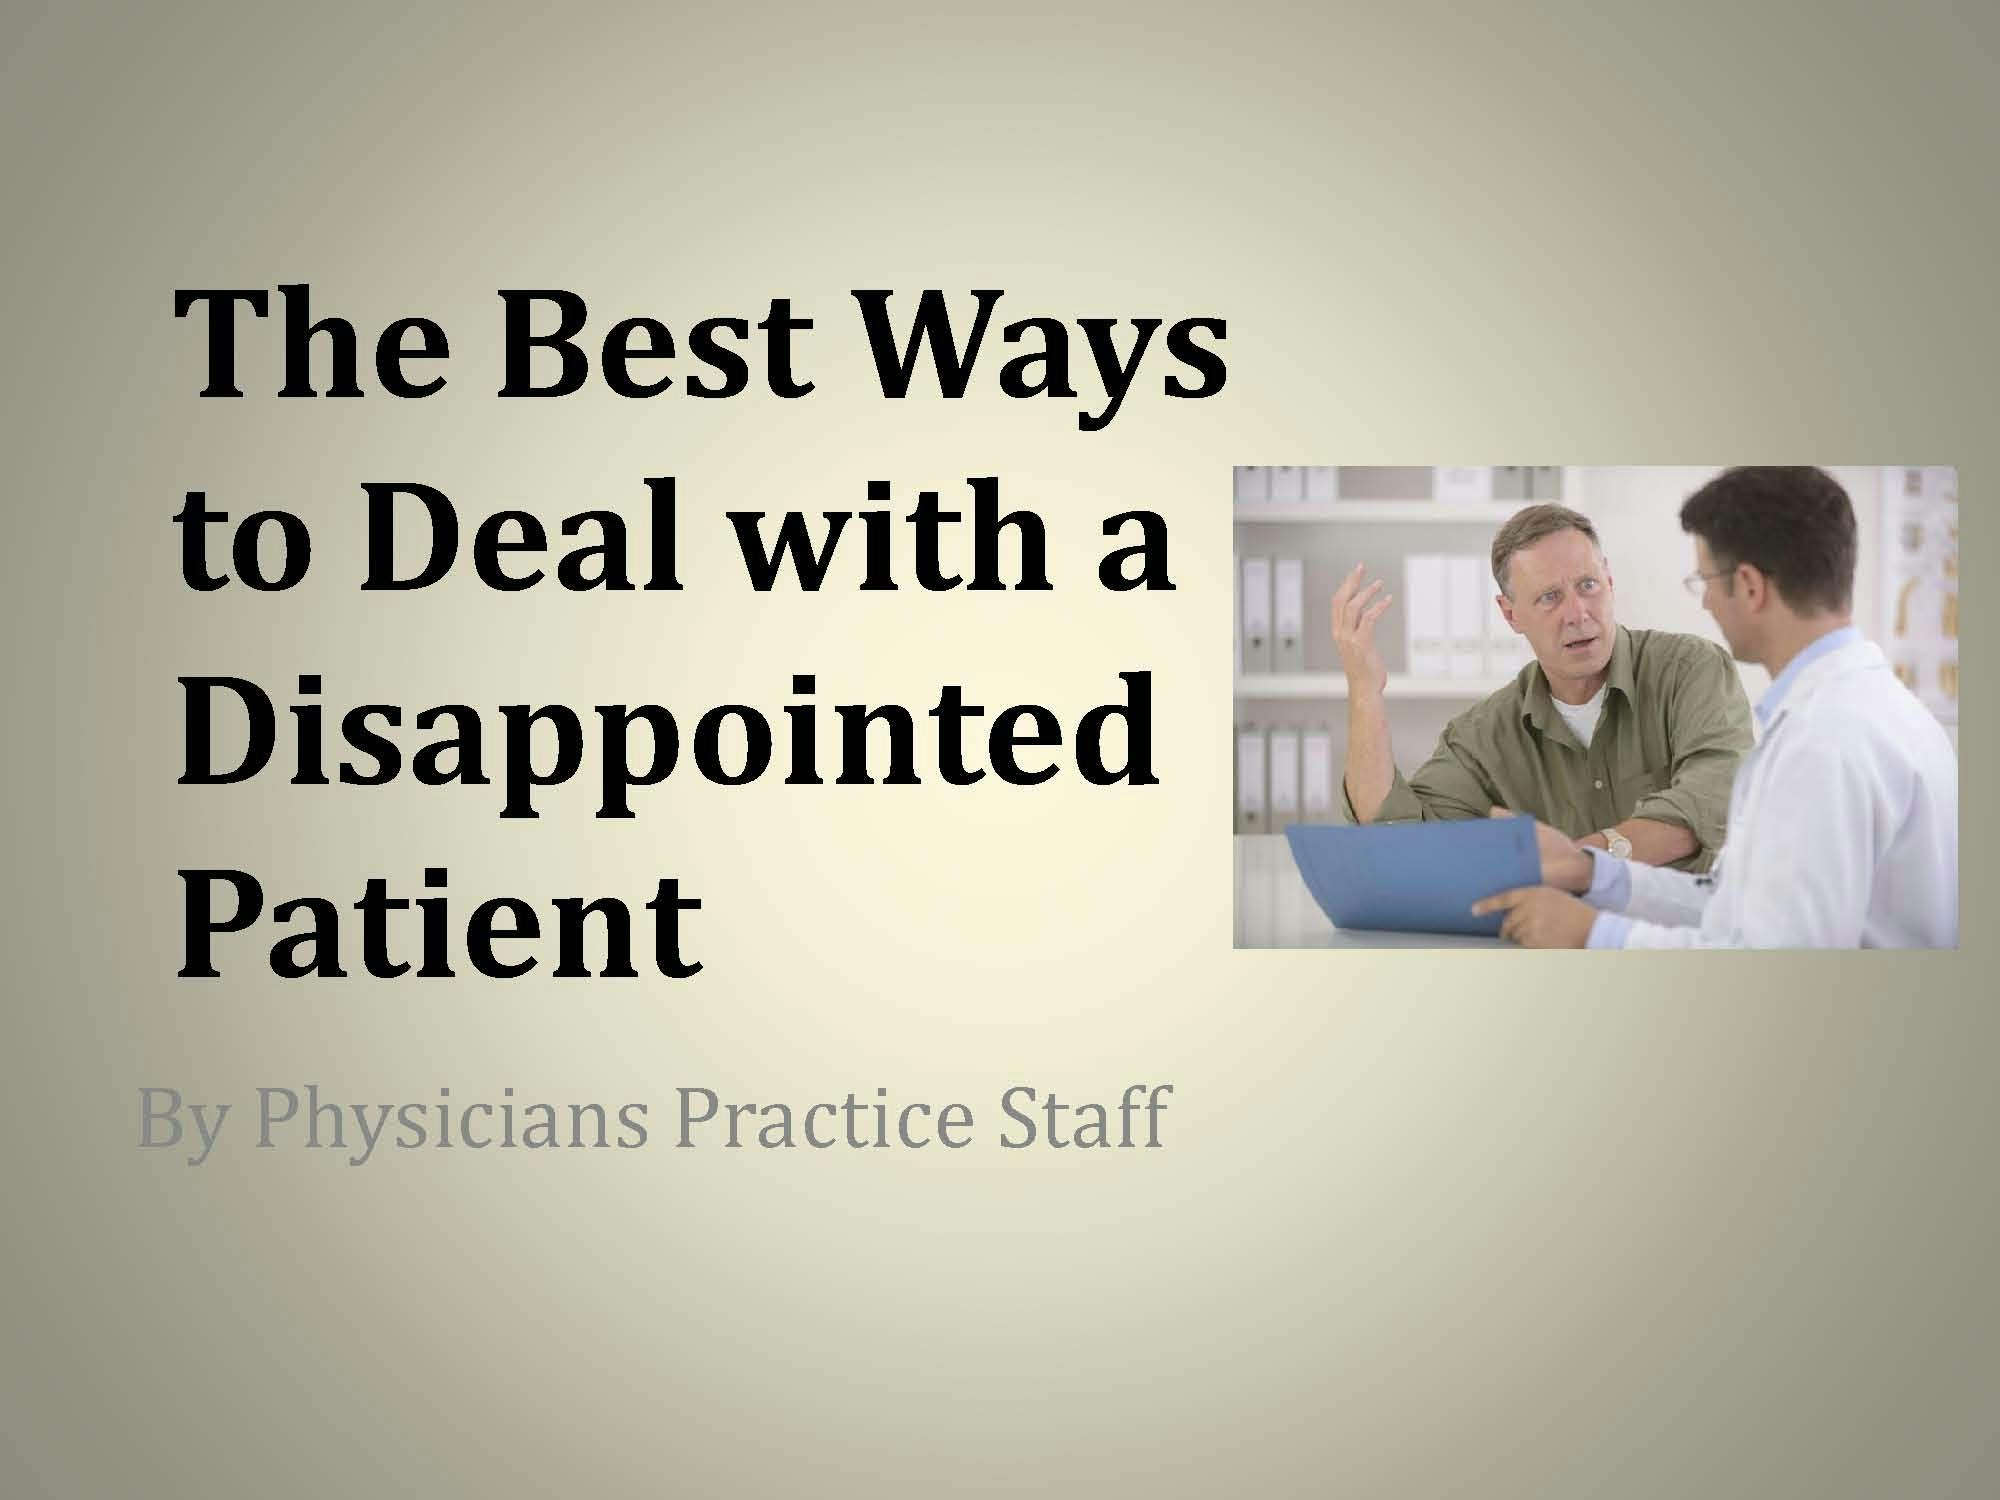 The Best Ways to Deal with a Disappointed Patient